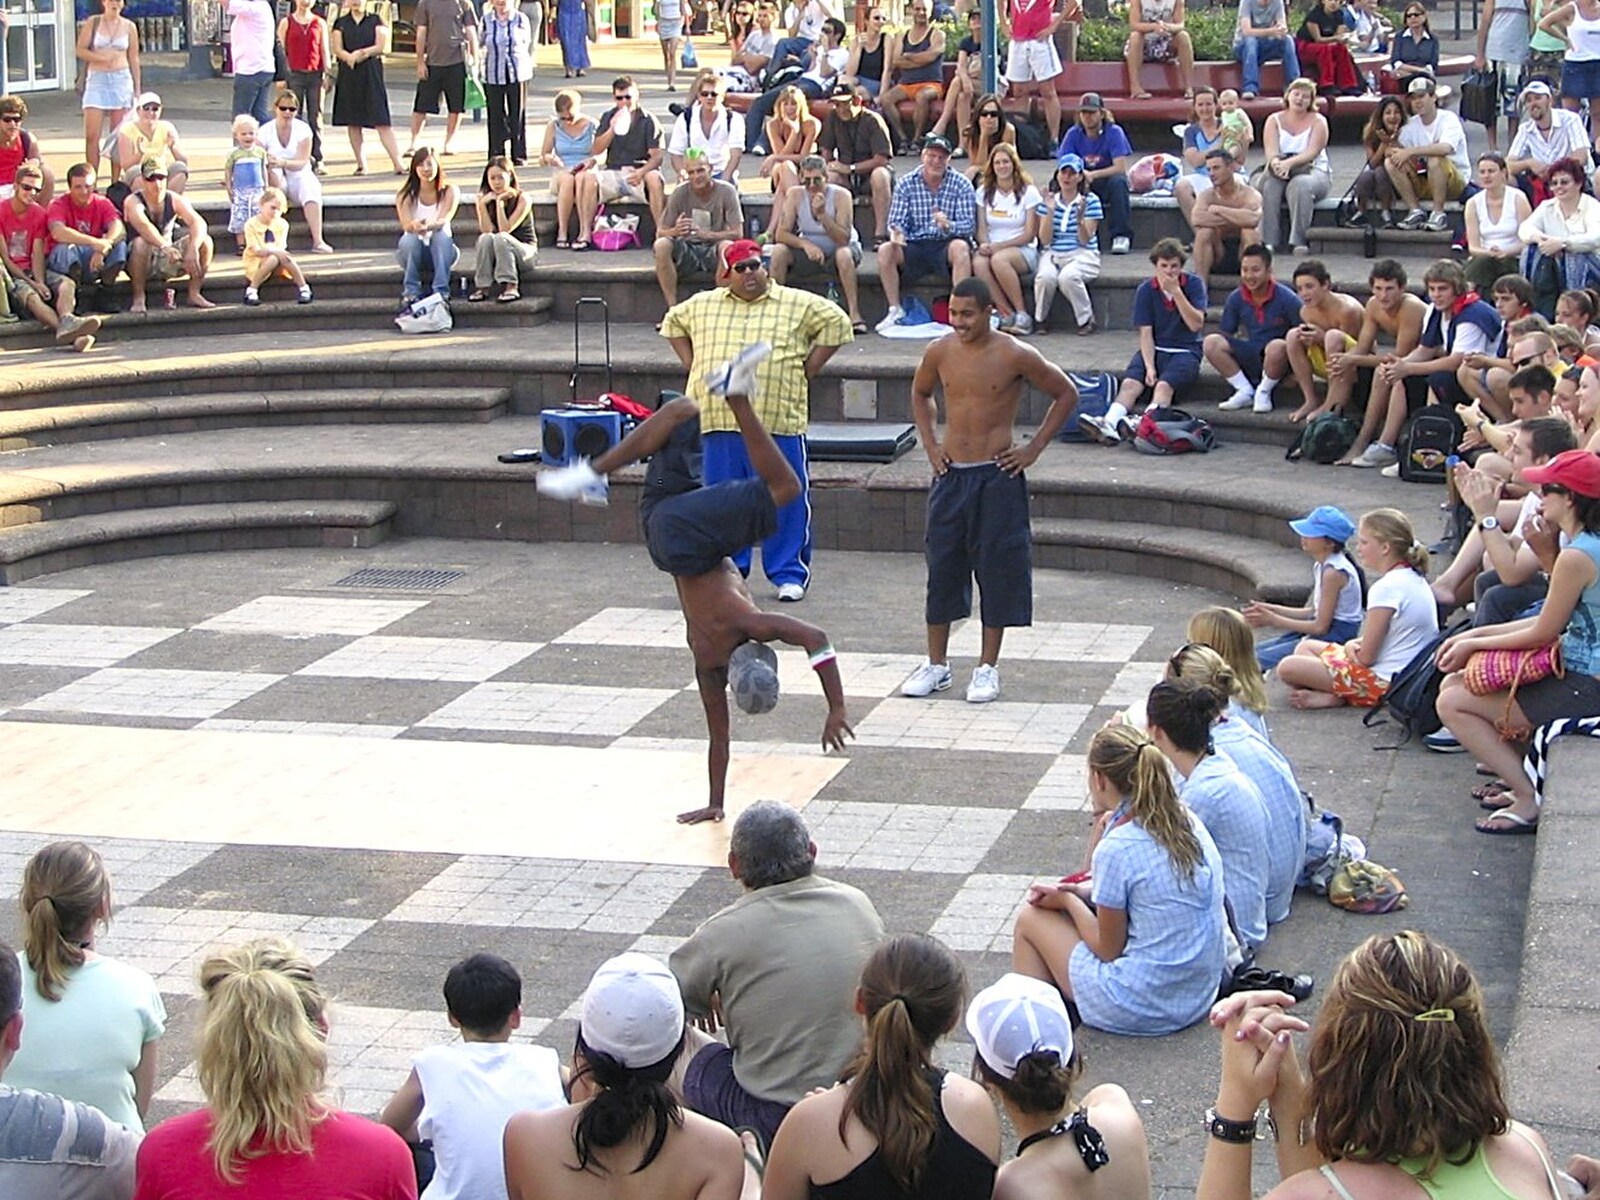 There's a breakdancing street act from The Bronx from Sydney, New South Wales, Australia - 10th October 2004